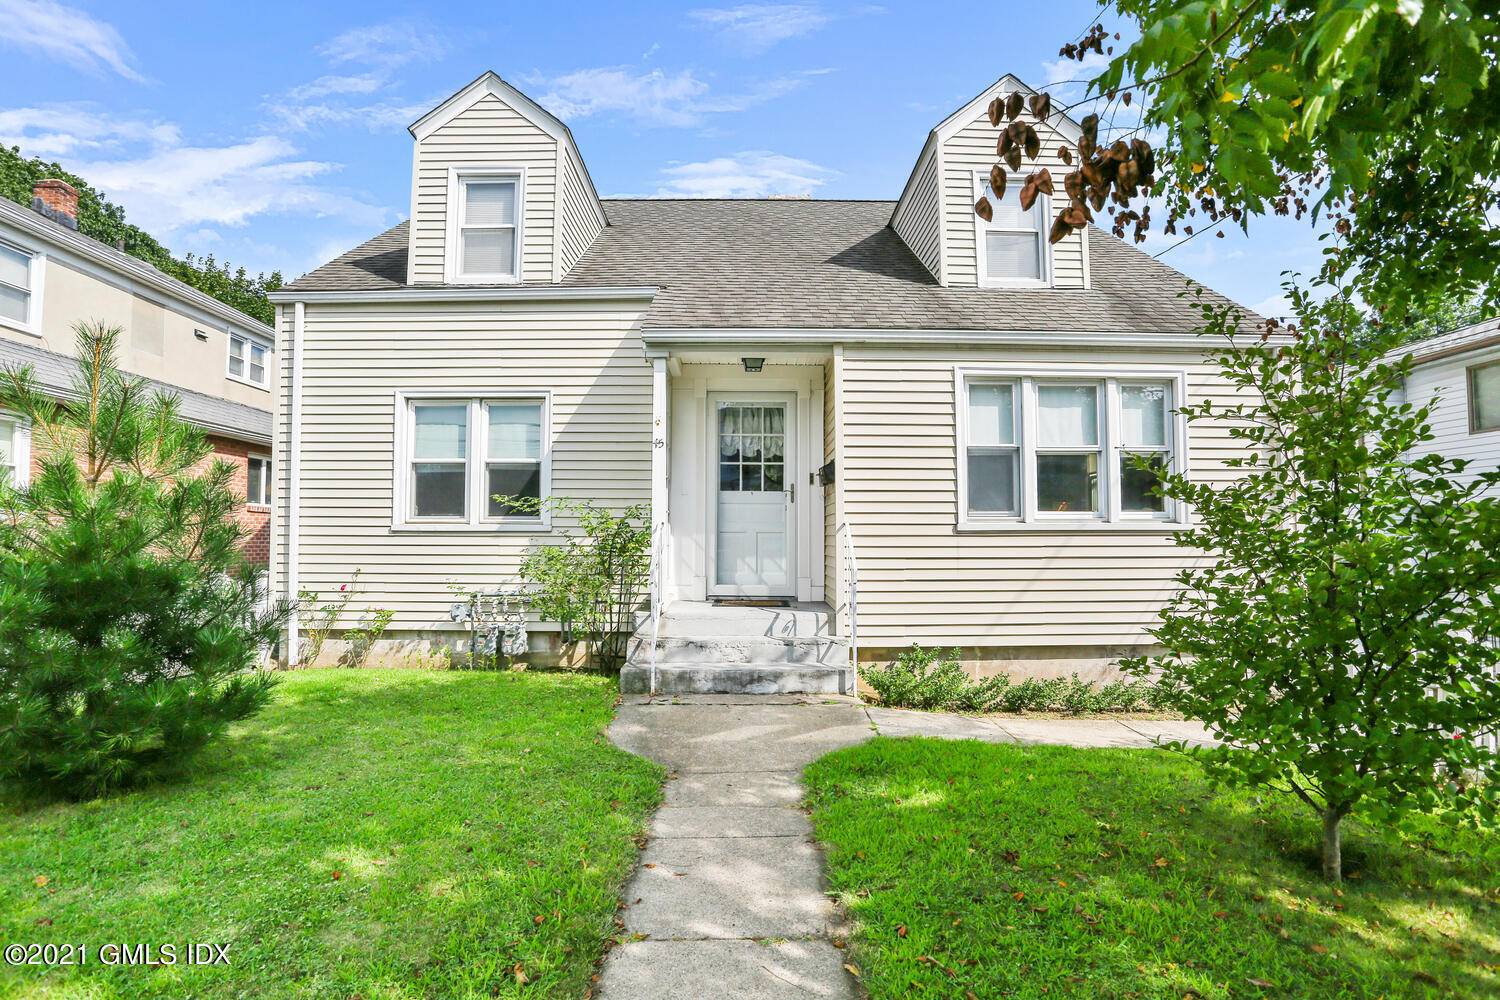 Gracious two family in an established neighborhood convenient to schools, town and train.